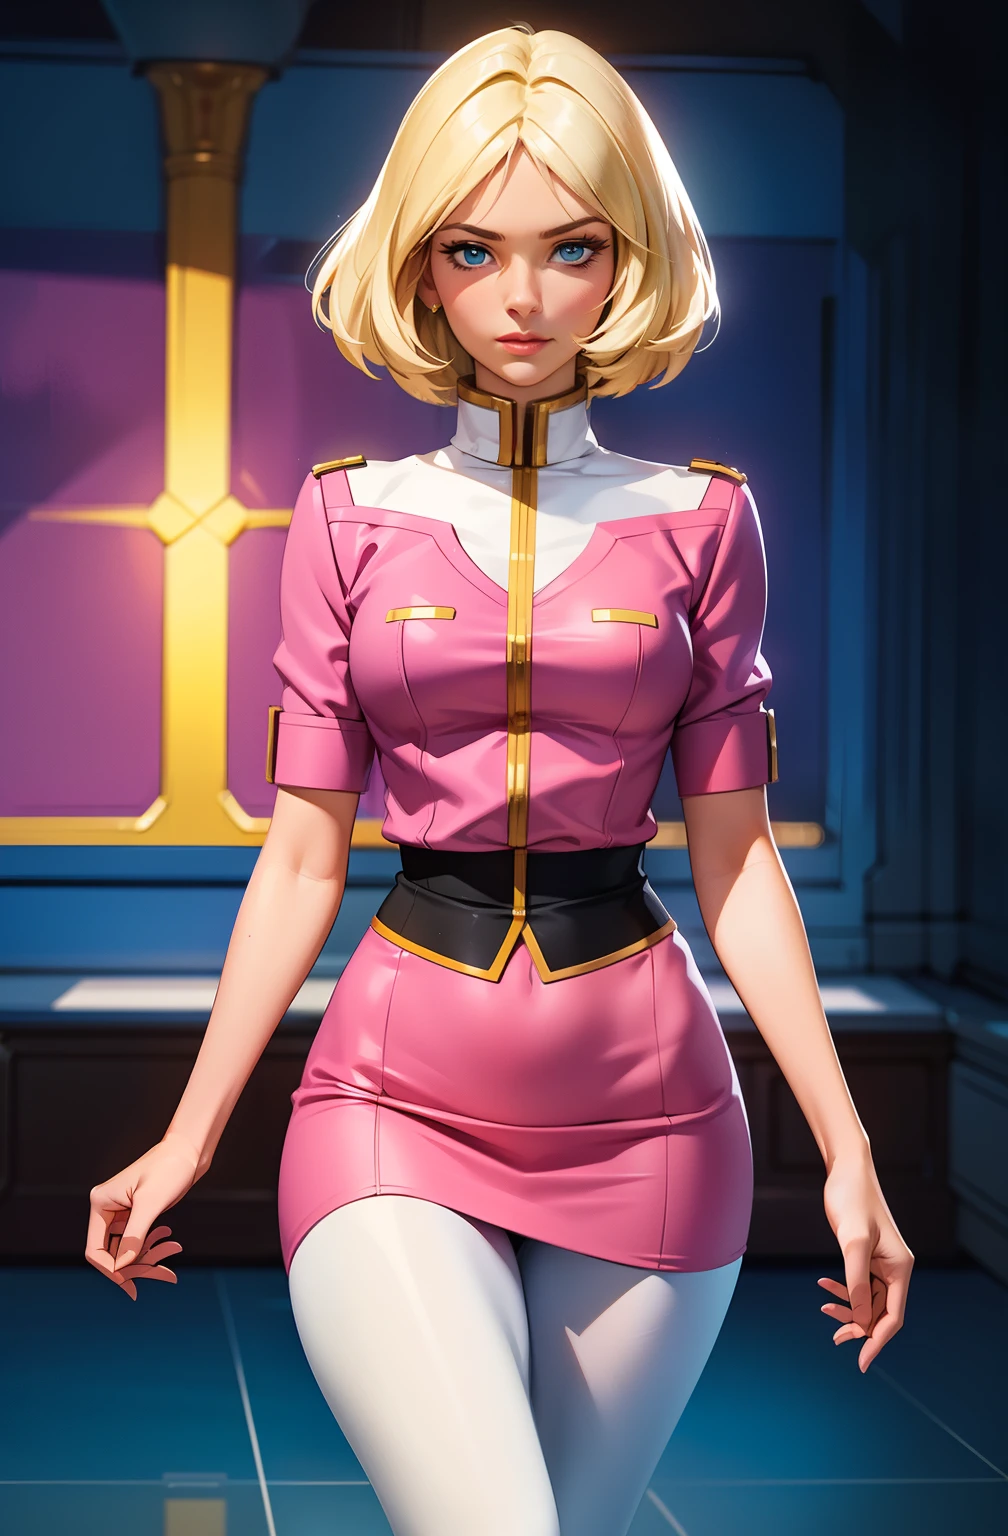 ((masterpiece)), ((cinematic lighting)), realistic photo、Real Images、Top image quality、1girl in, sayla mass, Elegant, masterpiece, Convoluted, slim arms, wide hips, thigh gaps, Best Quality, absurderes, high face detail, Perfect eyes, mature, Cowboy Shot, , Vibrant colors, soft pink uniform, soft pink Skirt, white tights